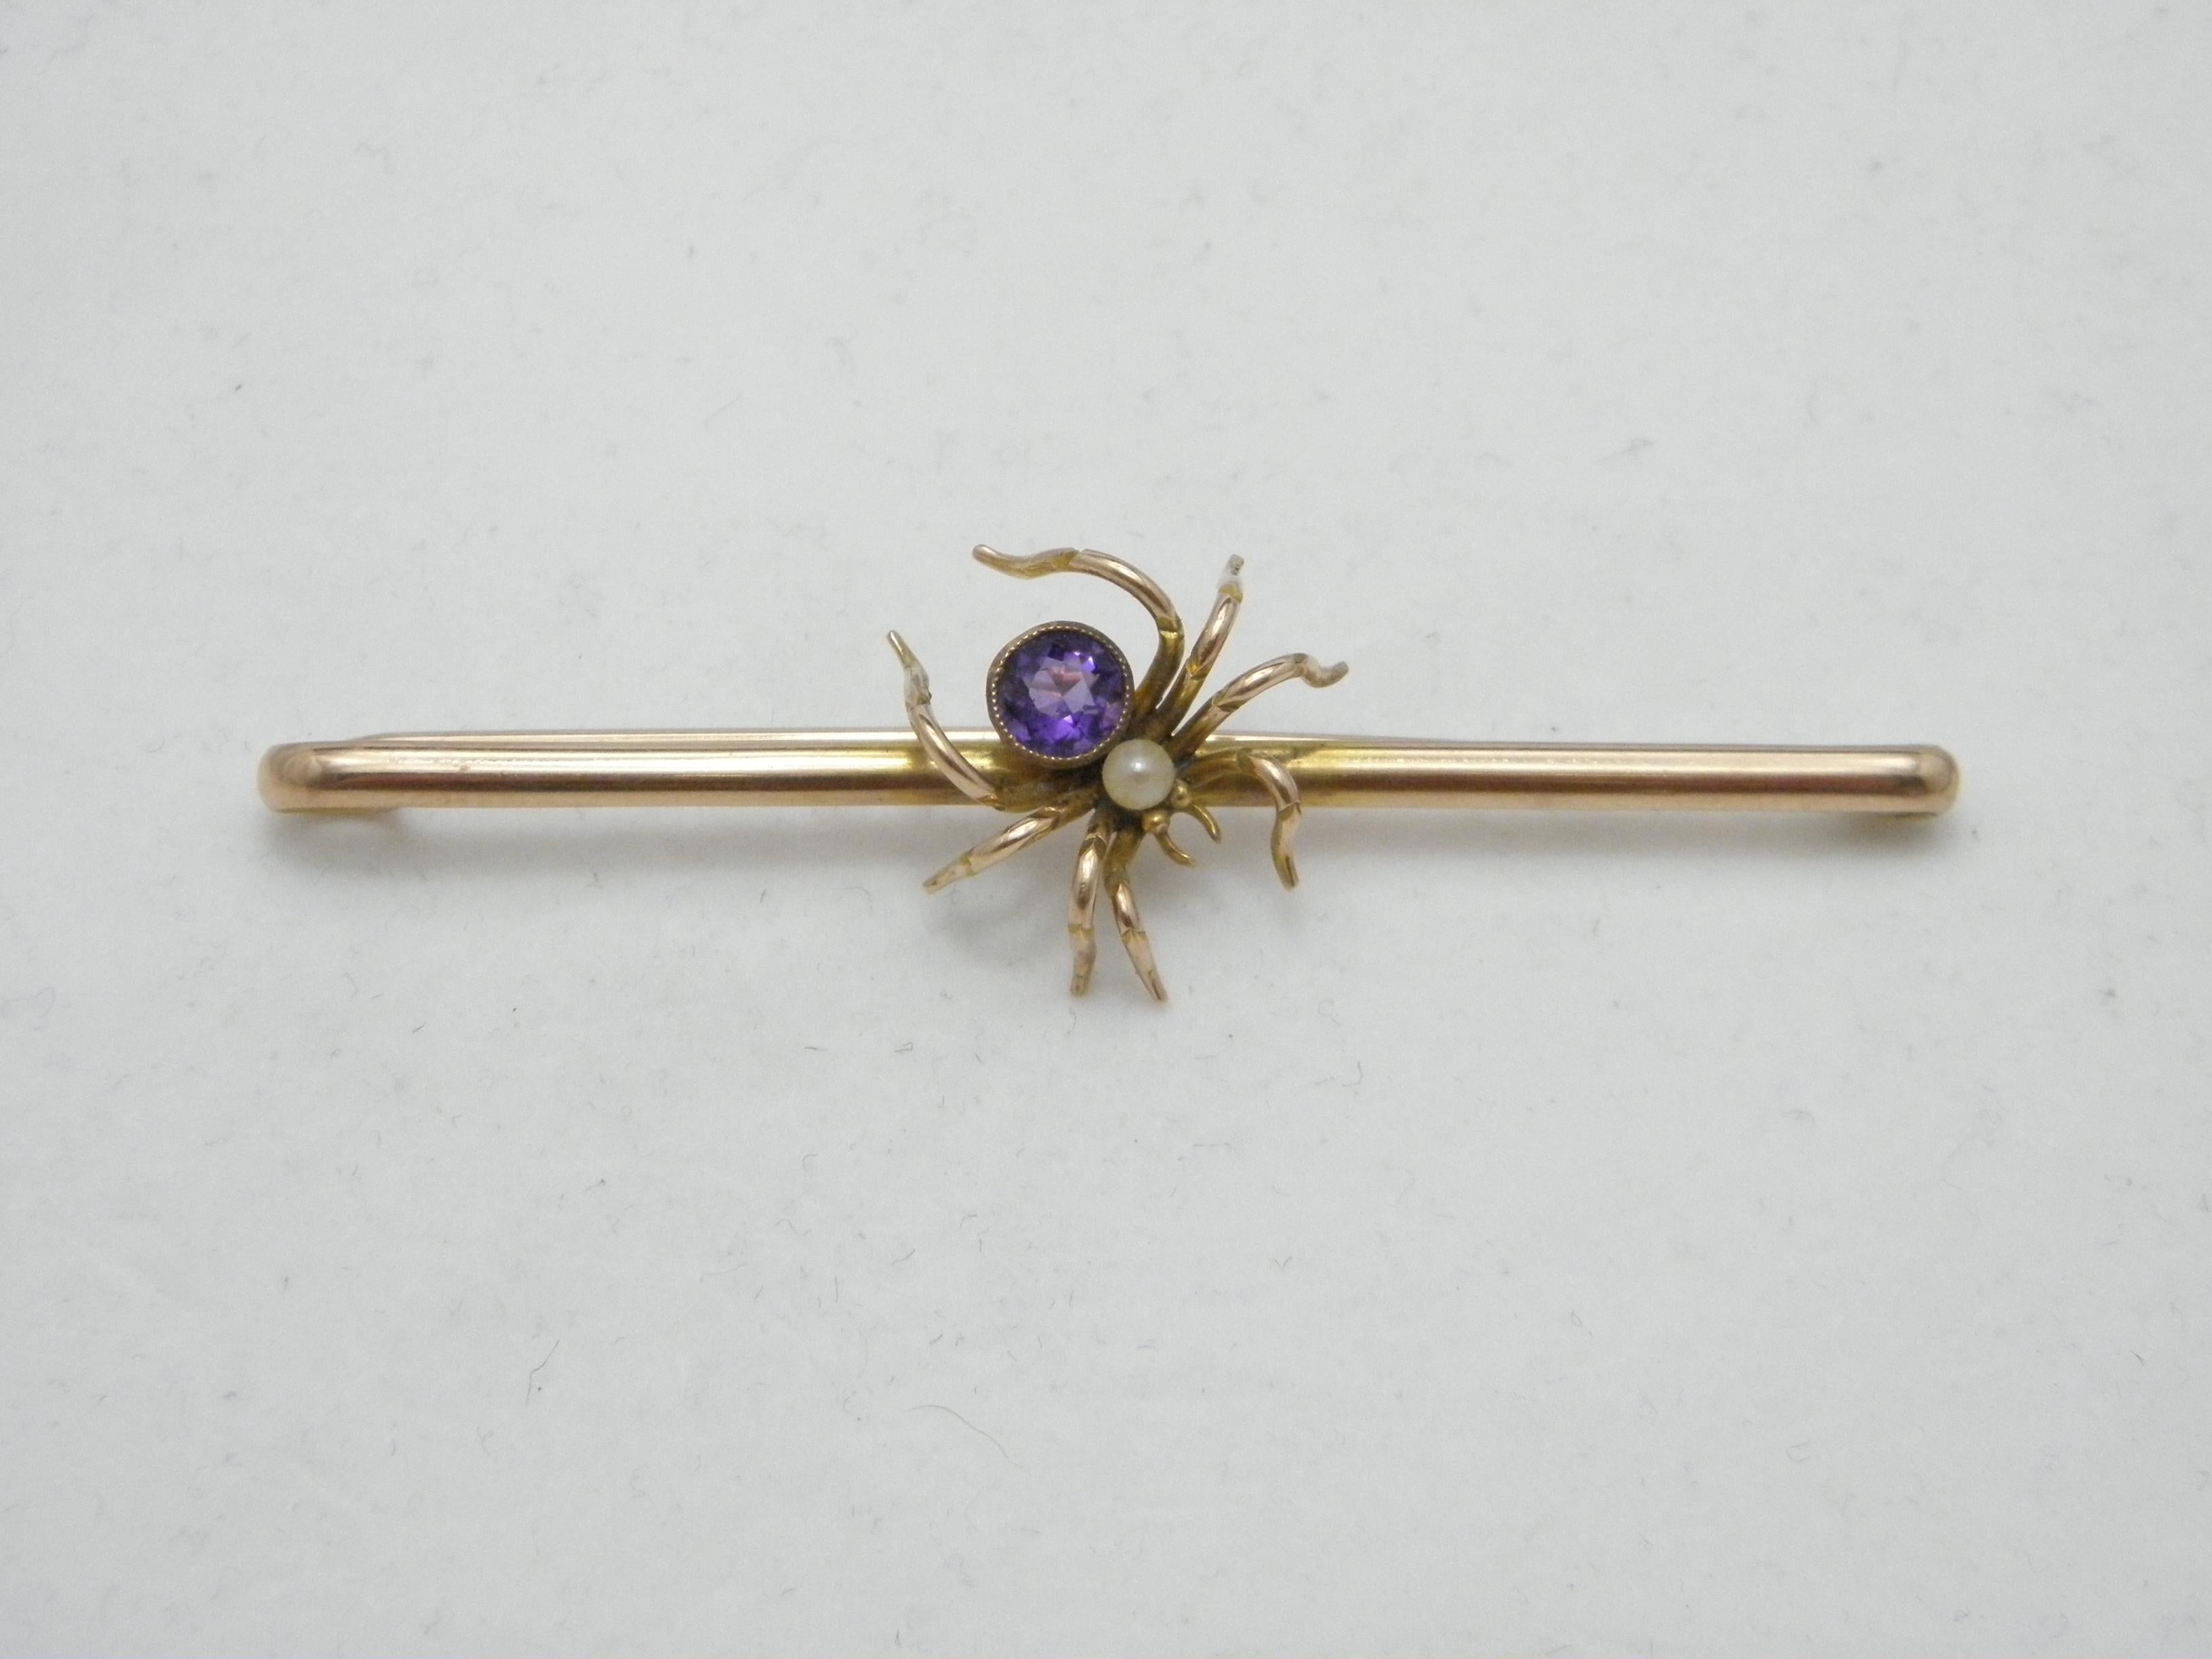 If you have landed on this page then you have an eye for beauty.

On offer is this gorgeous

9CT HEAVY GOLD AMETHYST AND PEARL SPIDER BAR BROOCH

DETAILS
Material: 9ct (375/000) Solid Heavy Rosey Yellow Gold
Style: Classic Victorian Bug Brooch,